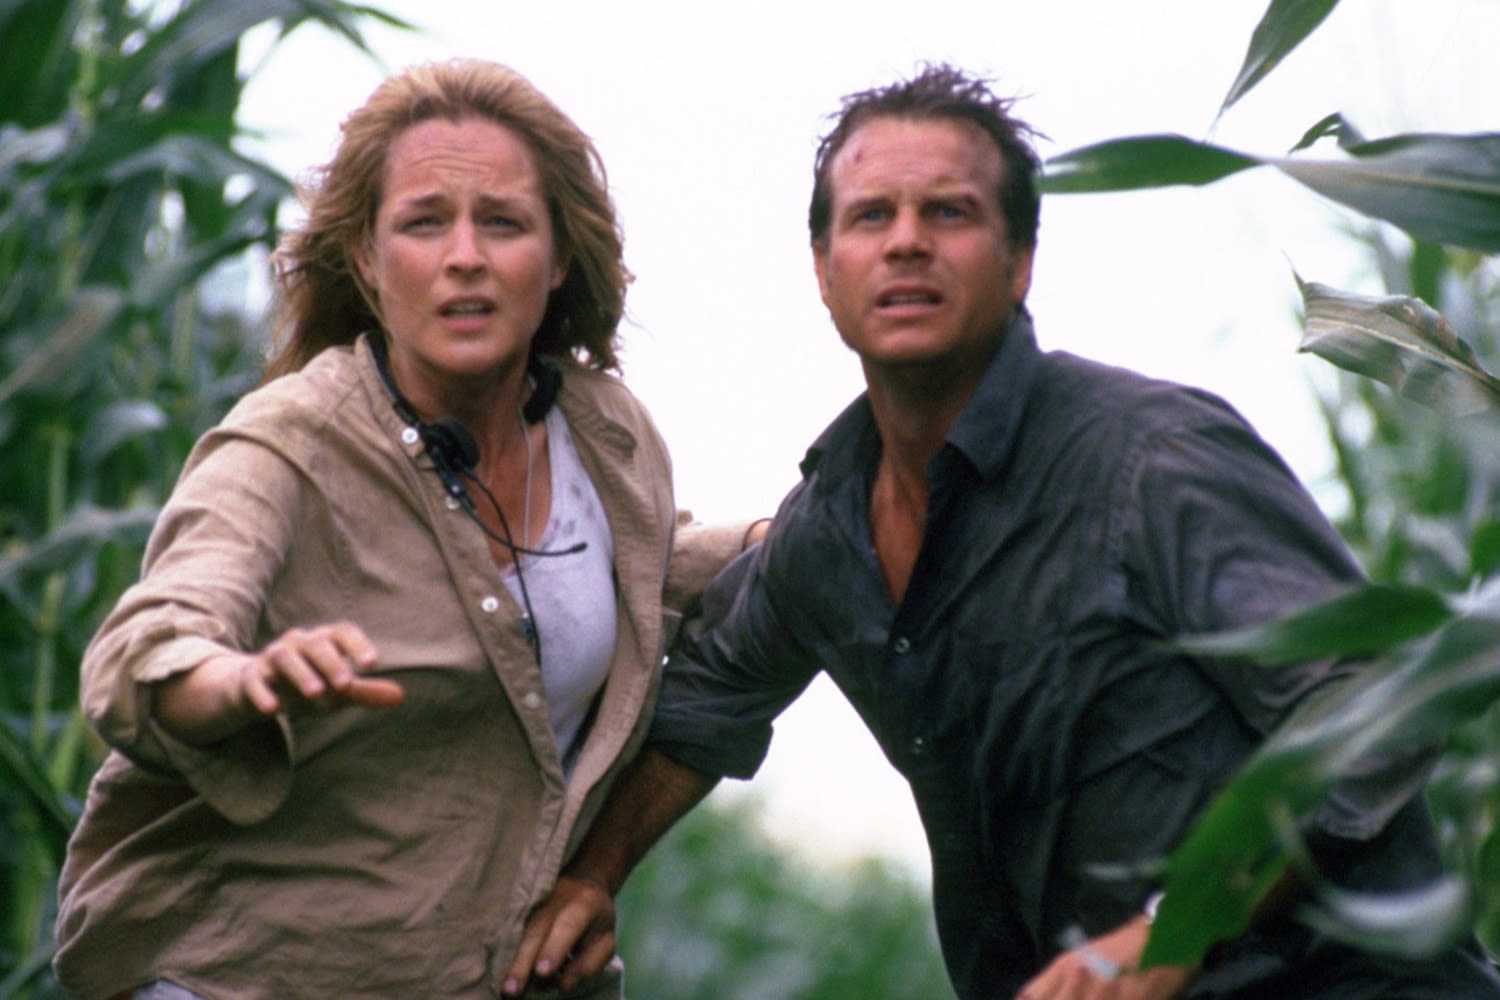 Where to watch Twister: stream the 1996 movie